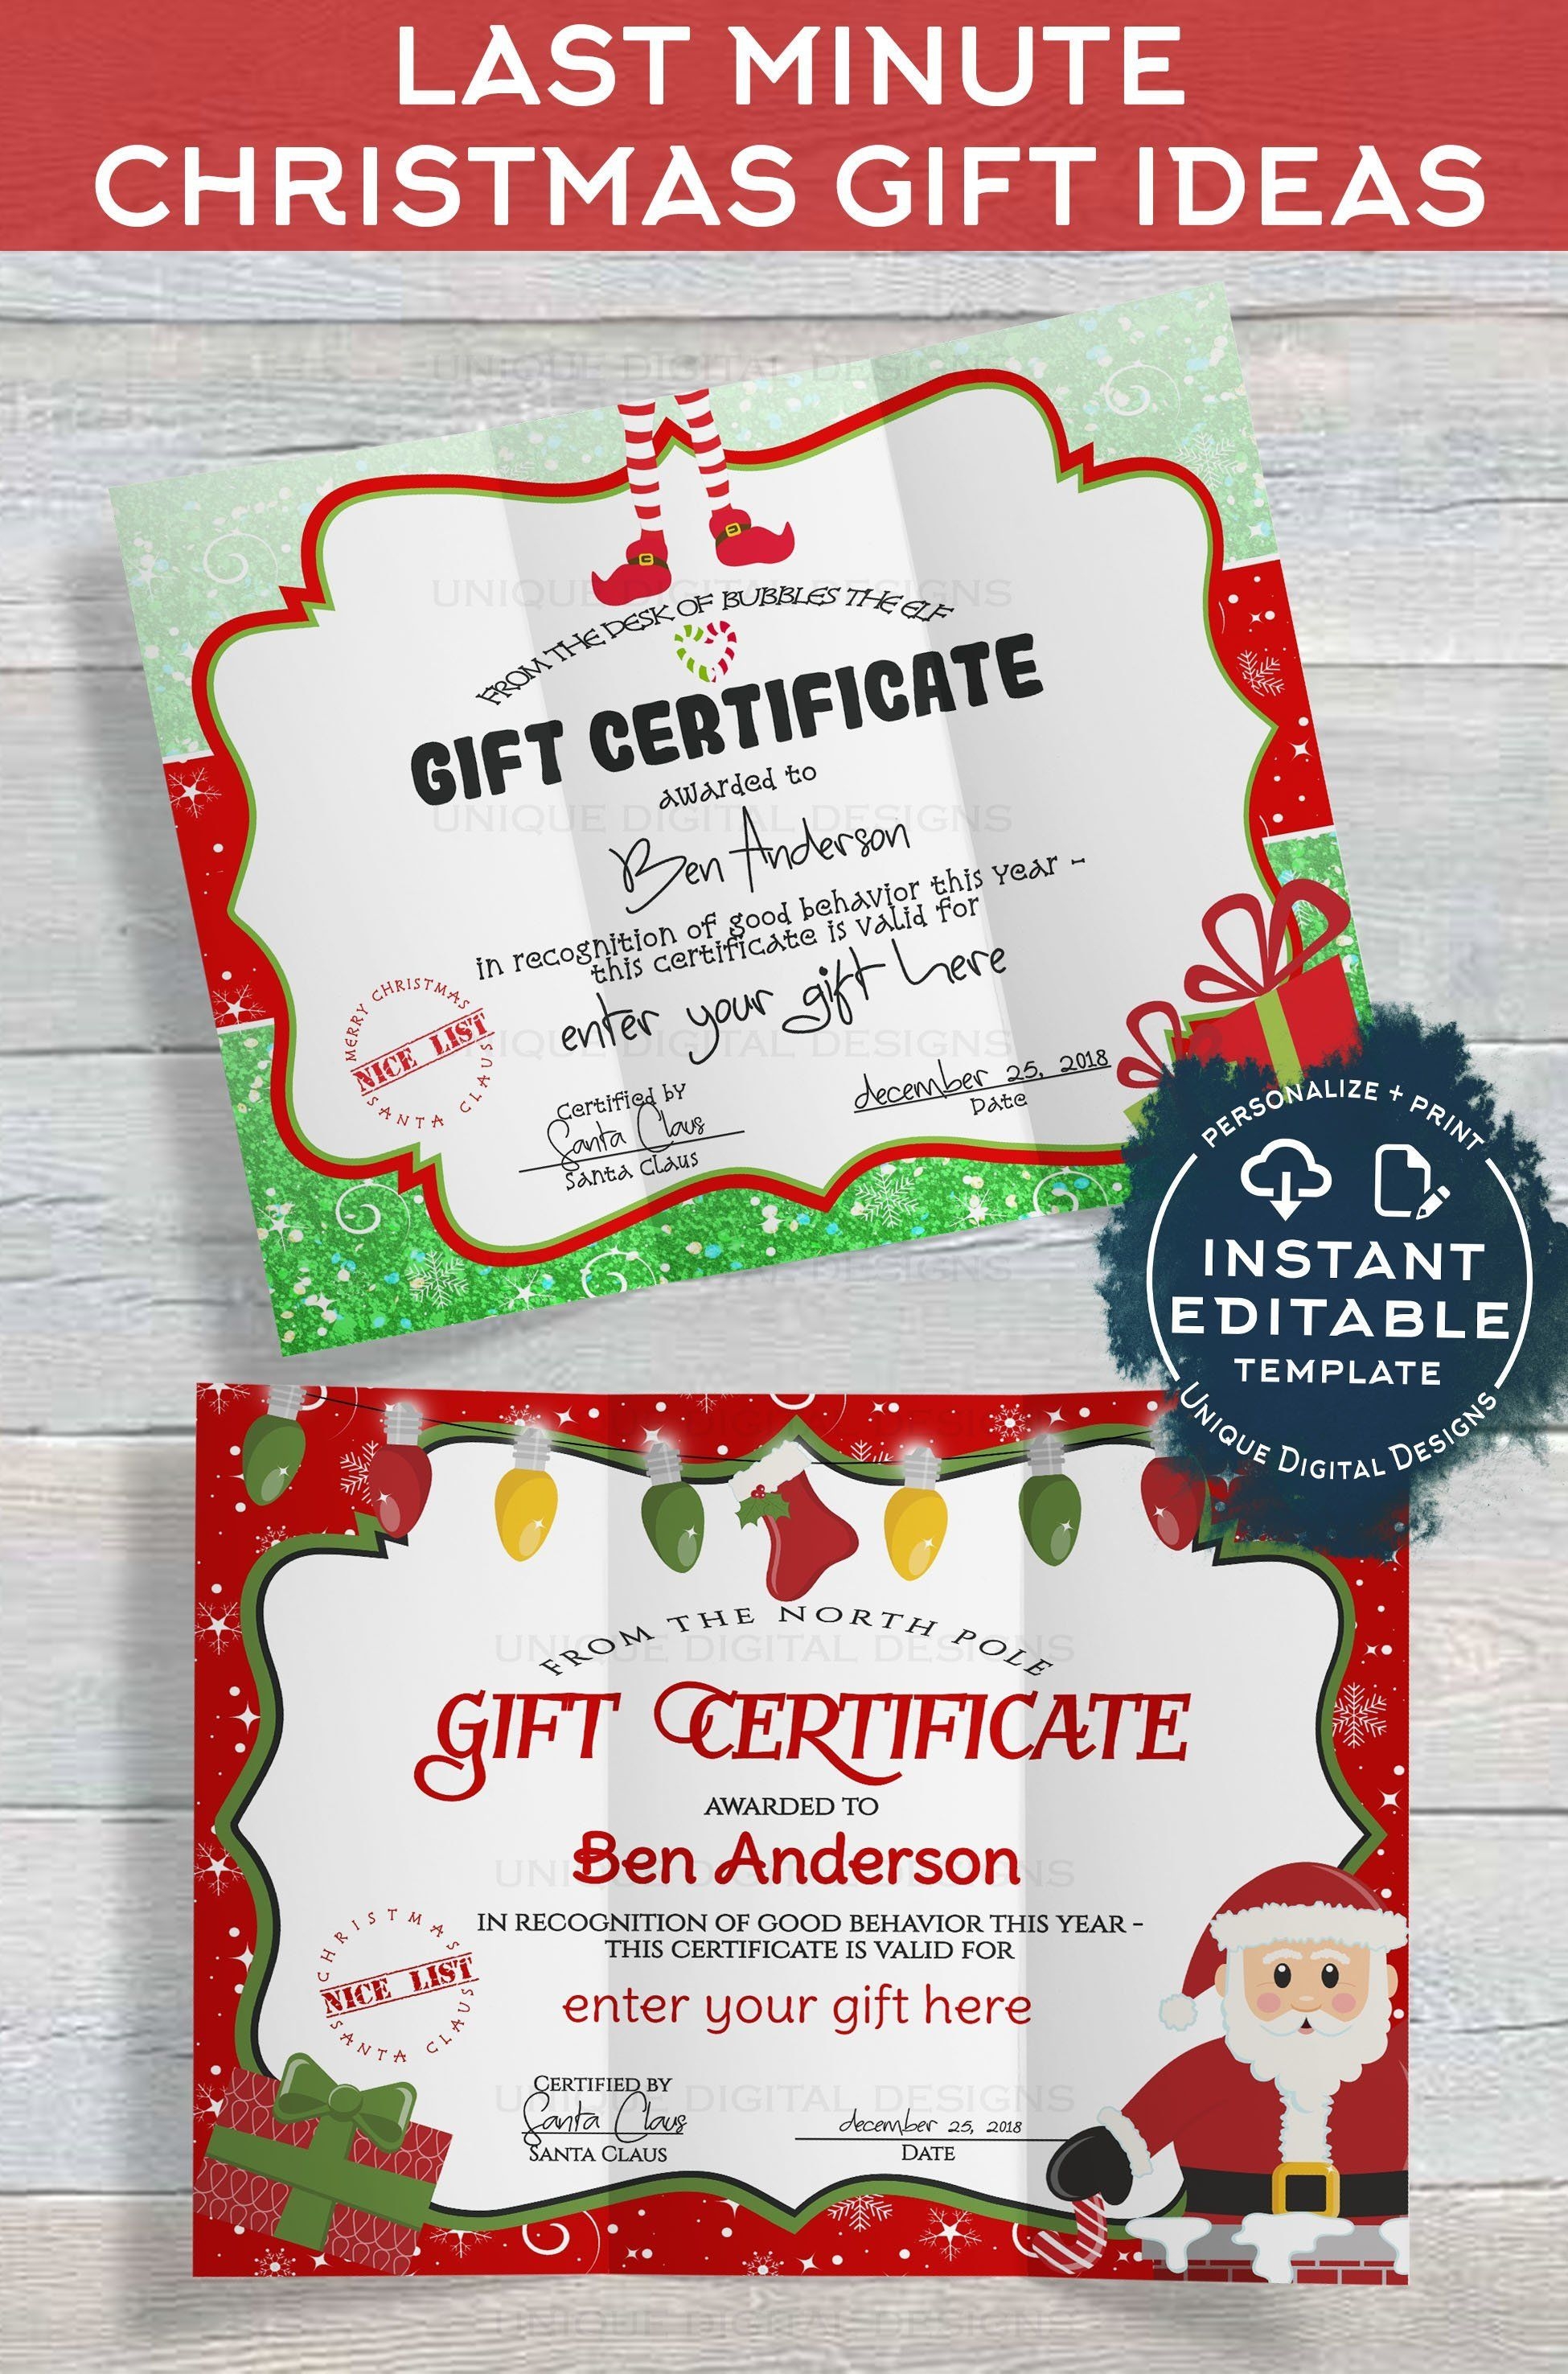 Gift Certificate Template Editable Gift Certificate From Santa